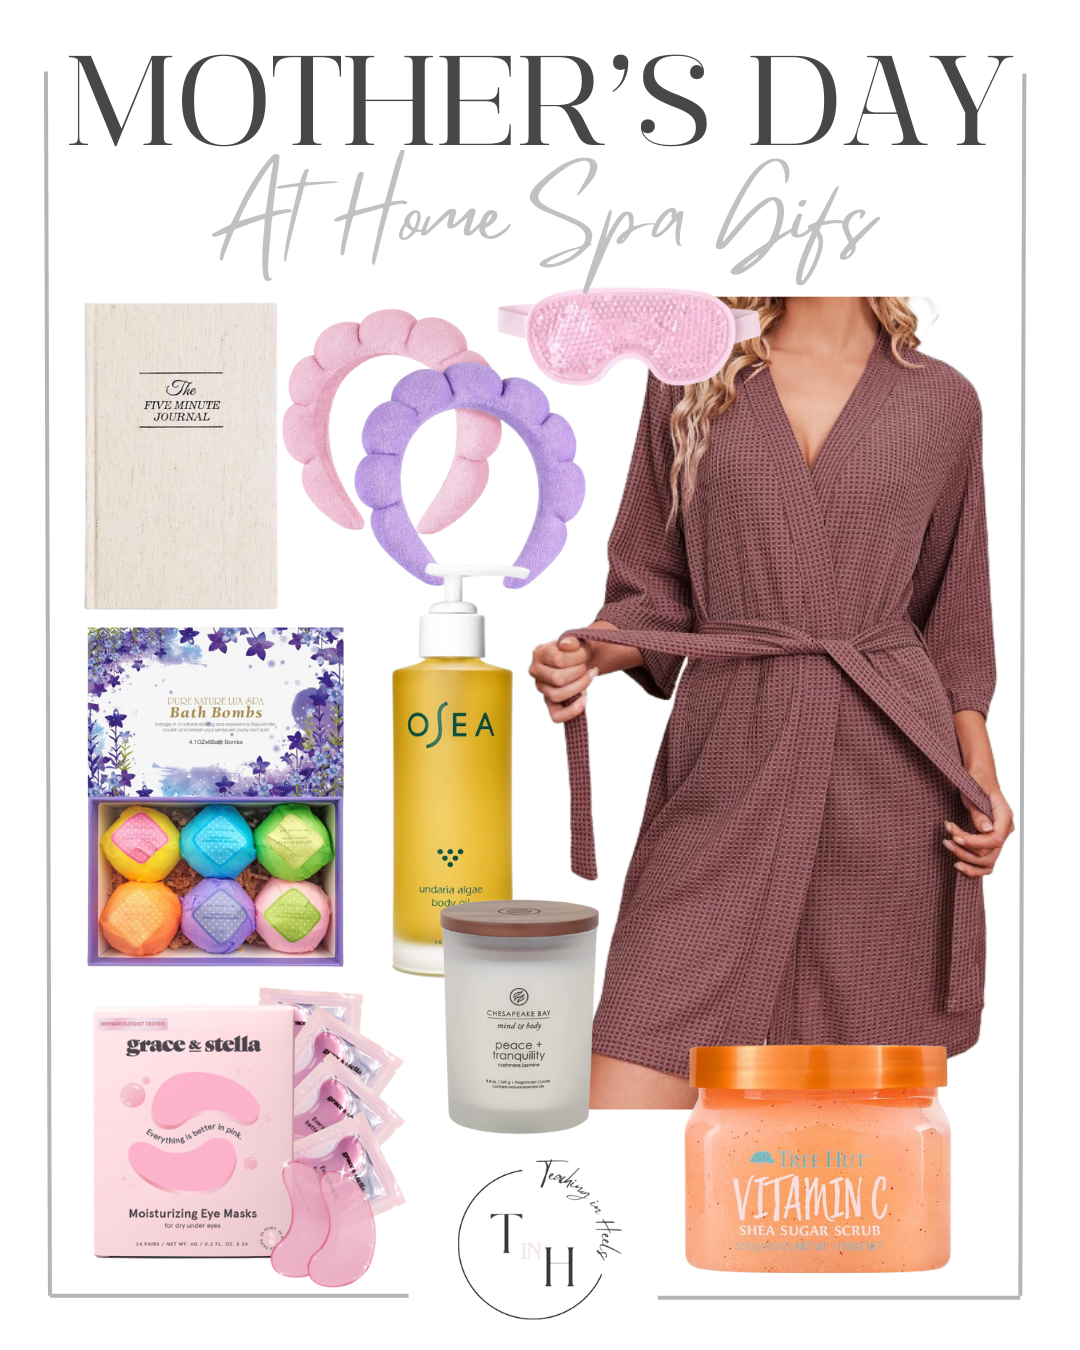 10 Heartwarming Mother's Day Gift Ideas to Show Your Love

mother's day, mother's gifts, mom gifts, gift guide, spa, spa day, wellness, bath bombs, bath robe